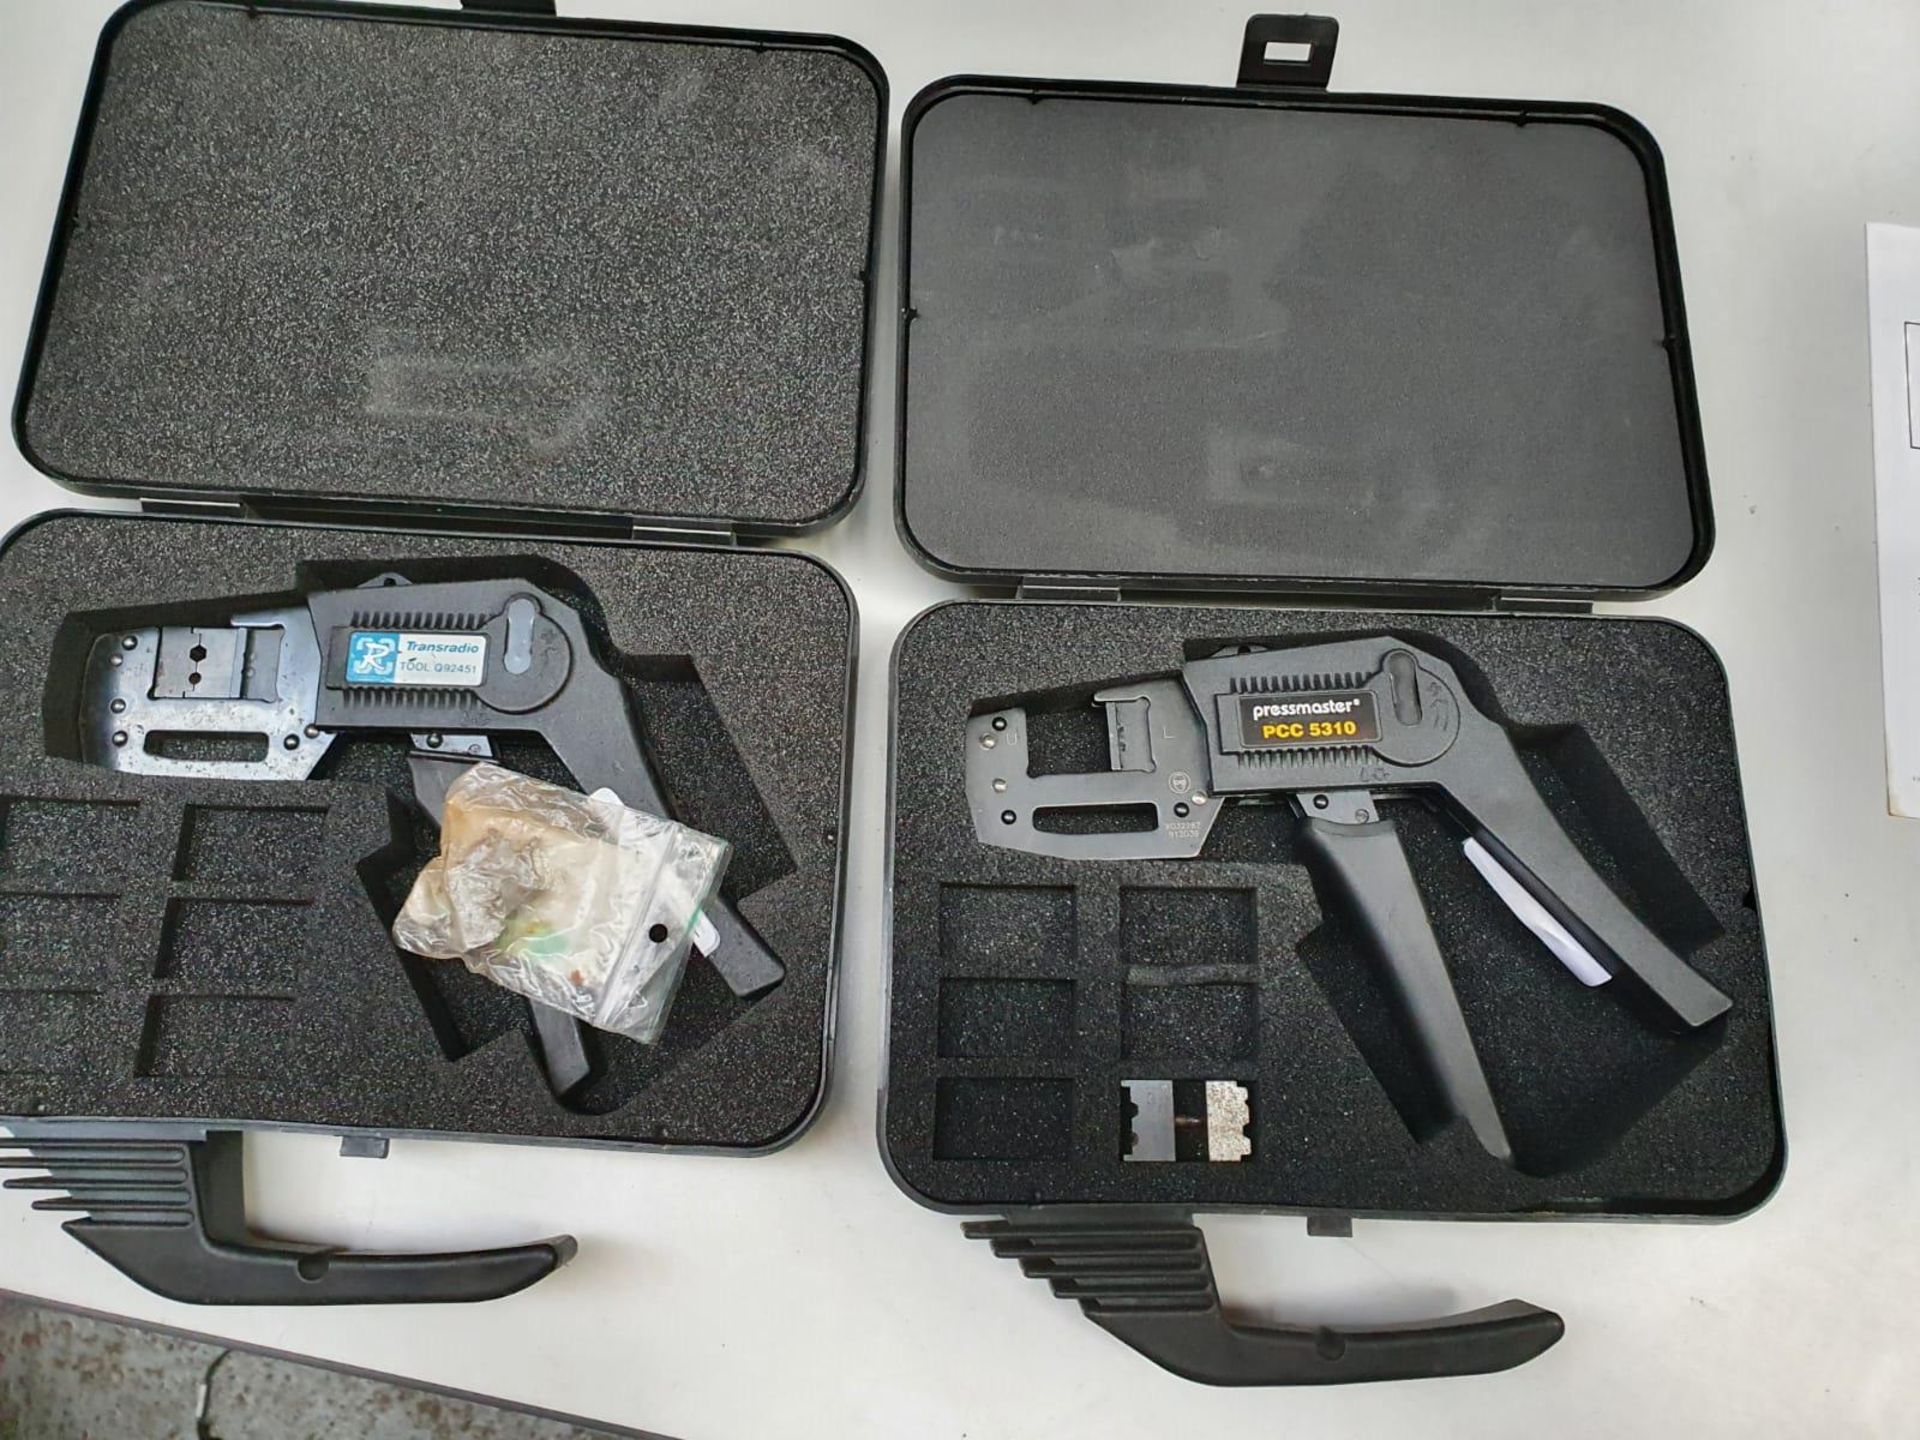 8 x Pressmaster PCC 5310 Crimp Tools With Cases - Includes Accessories - CL011 - WH1 - Location: - Image 3 of 4